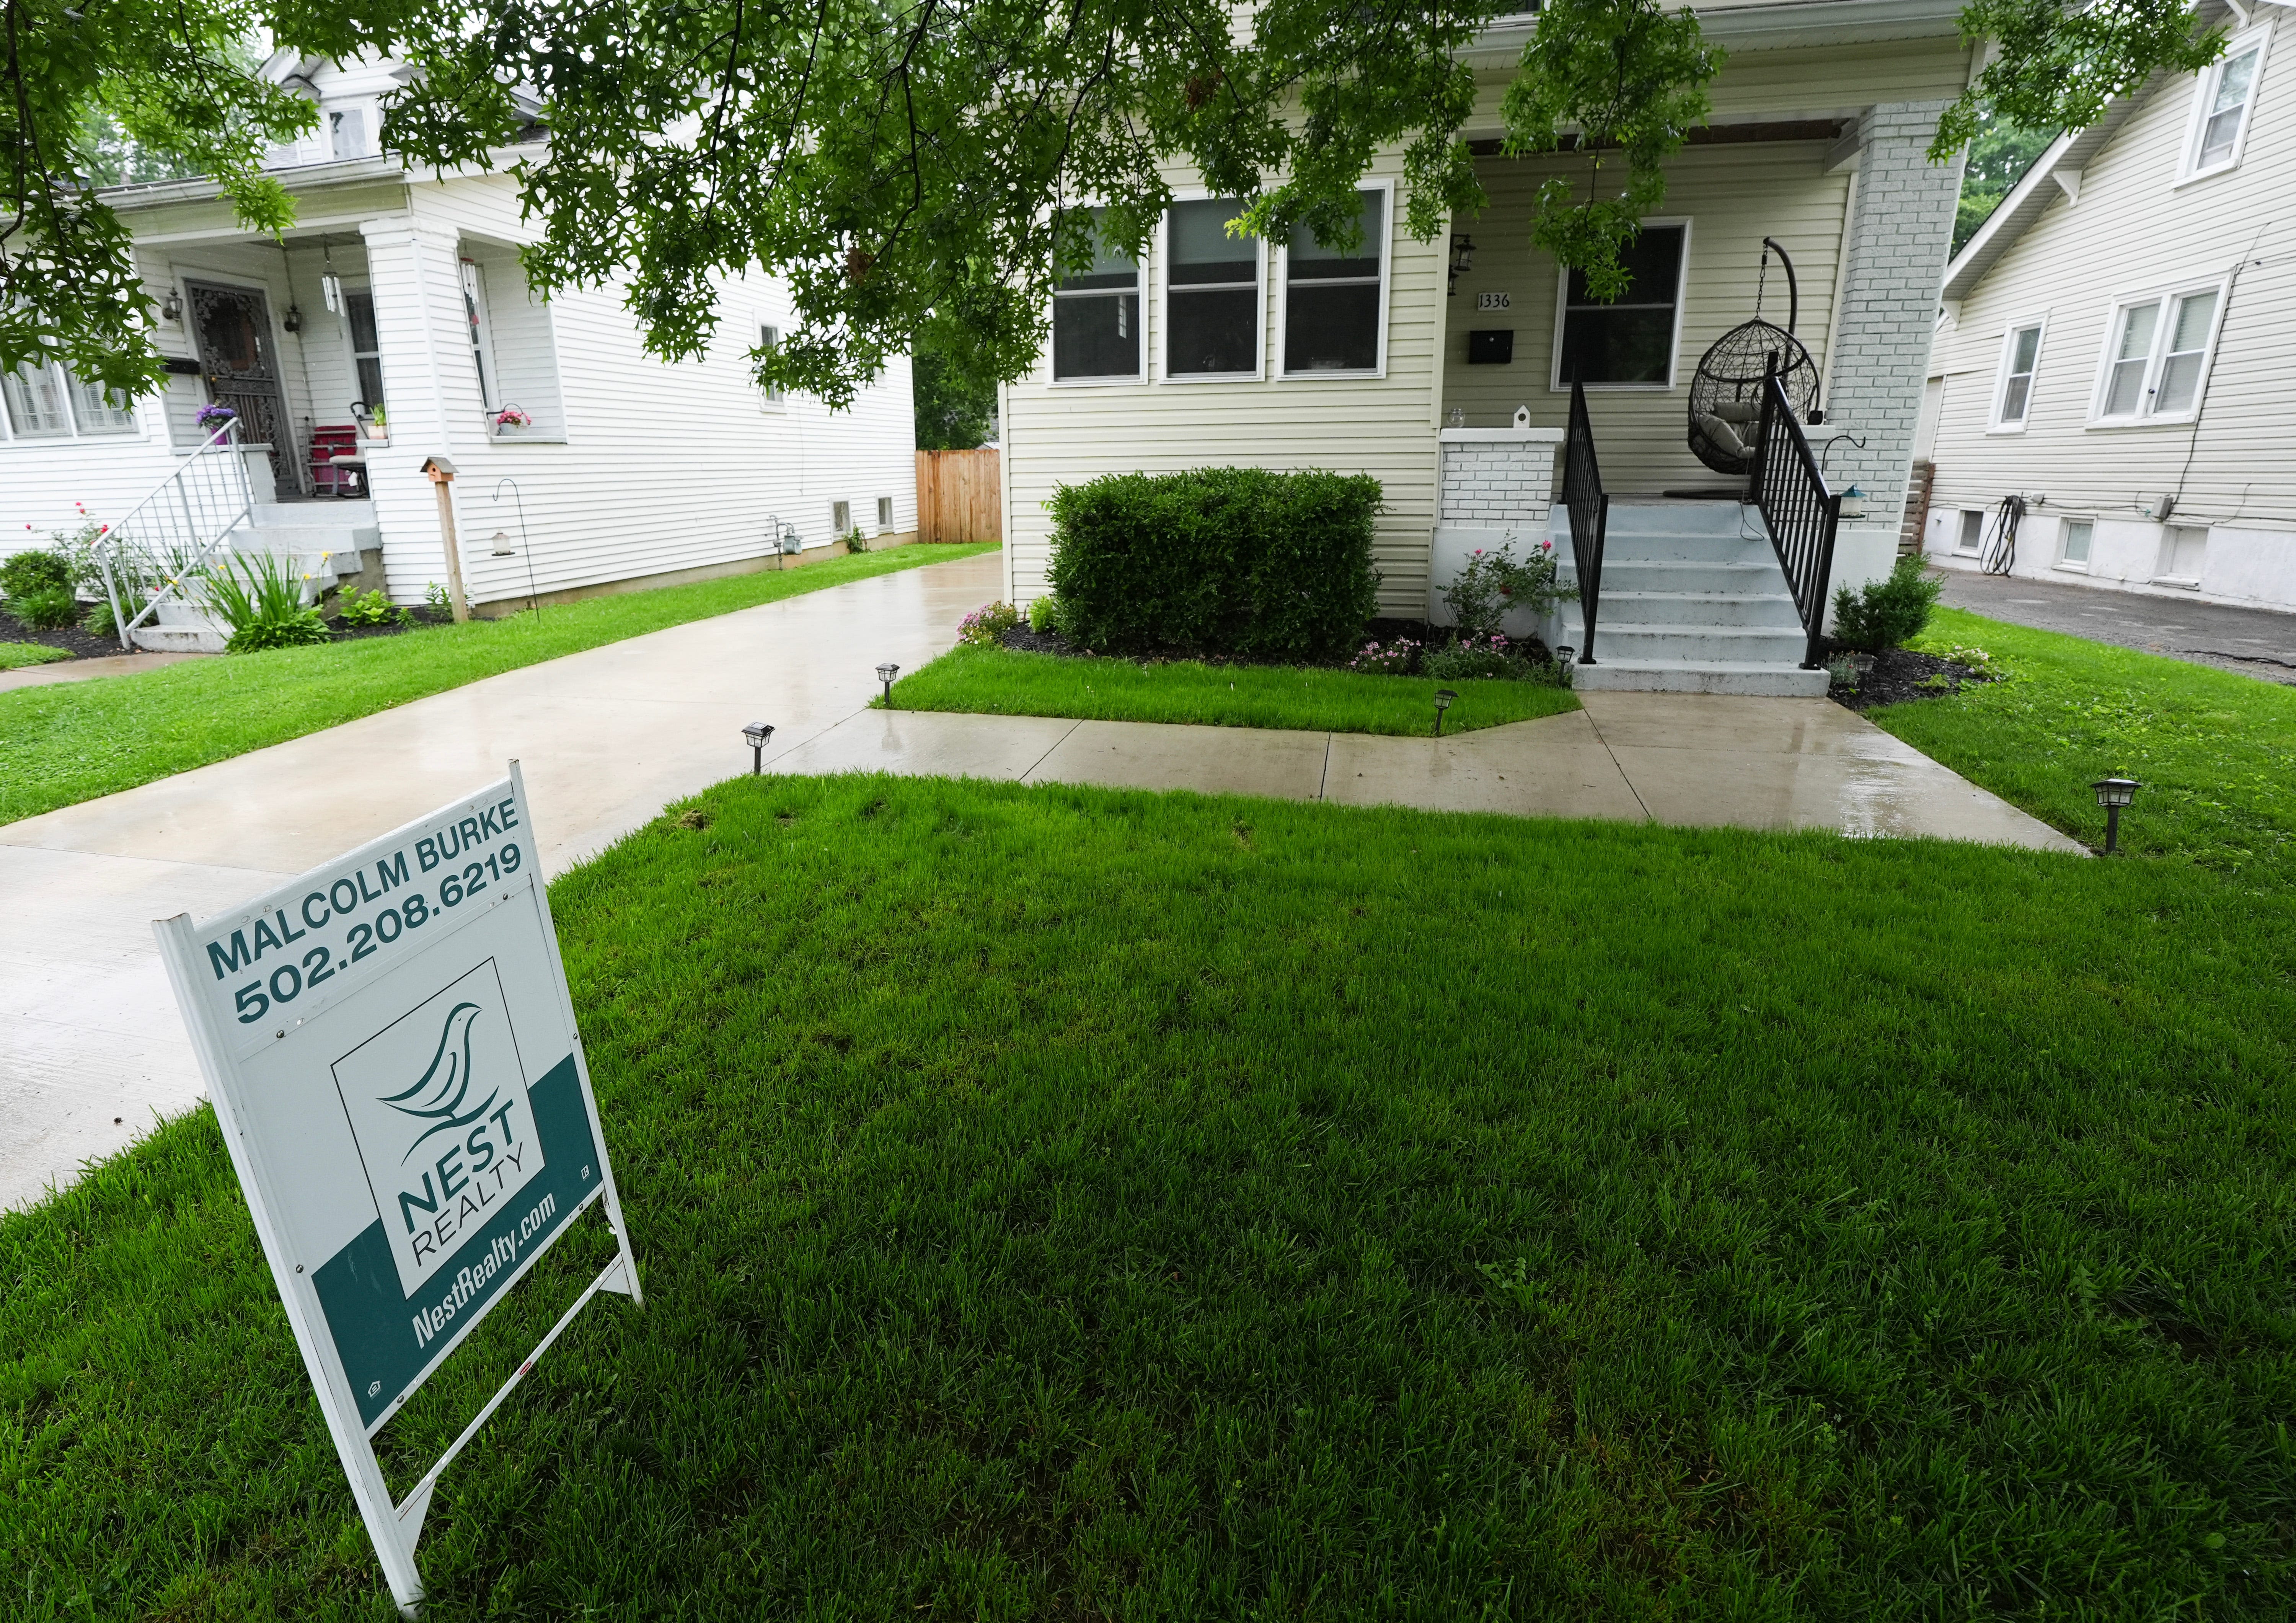 Louisville summer housing forecast: Buyers, sellers expect busy season